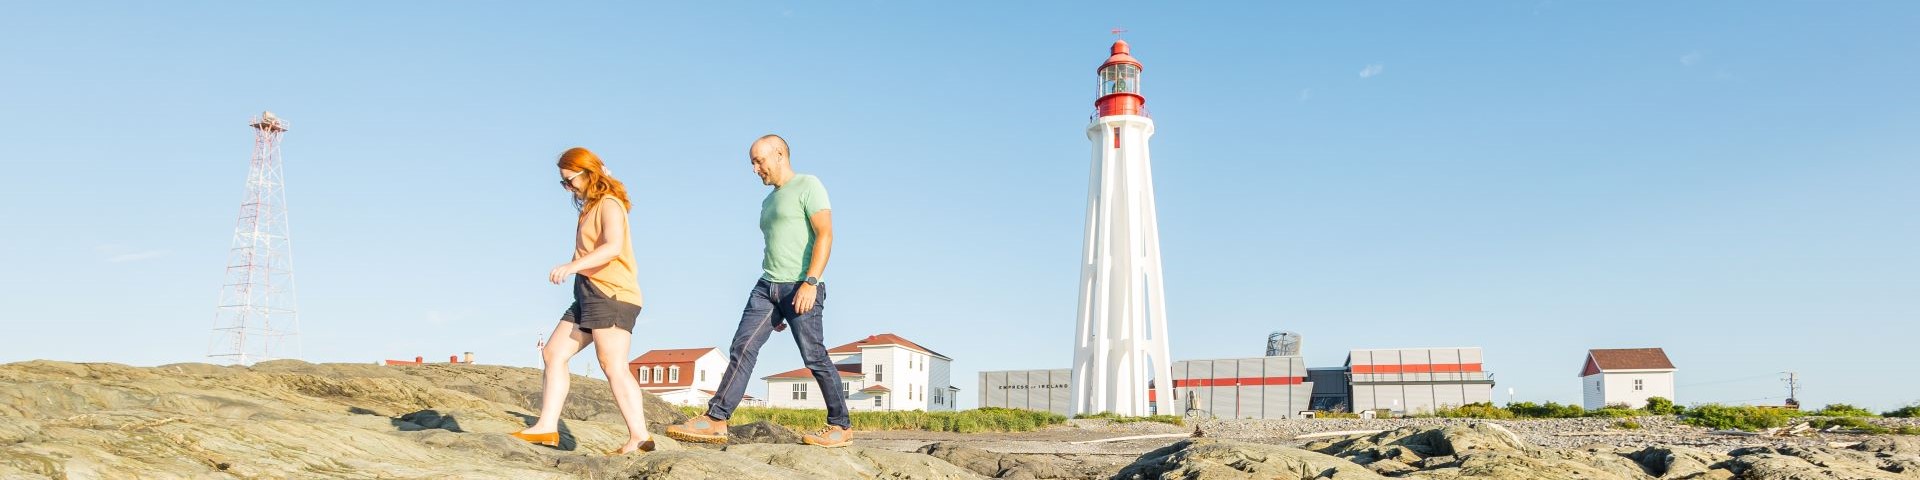 Two visitors are walking on a rocky shore in front a lighthouse and its dwellings. 